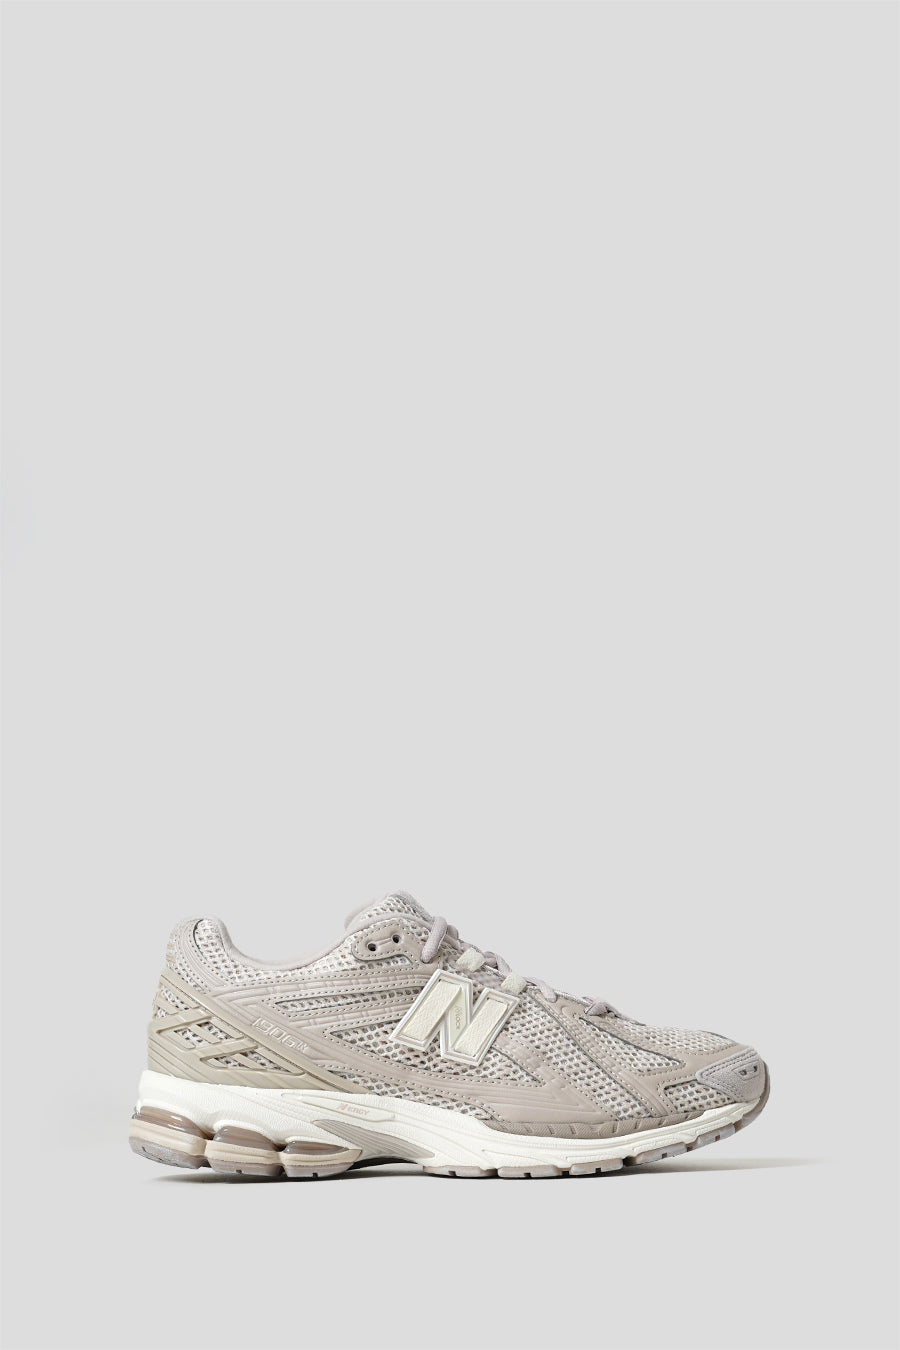 NEW BALANCE - MOONROCK MOONBEAM AND SEA SALT 1906R GREY DAY SNEAKERS - LE LABO STORE